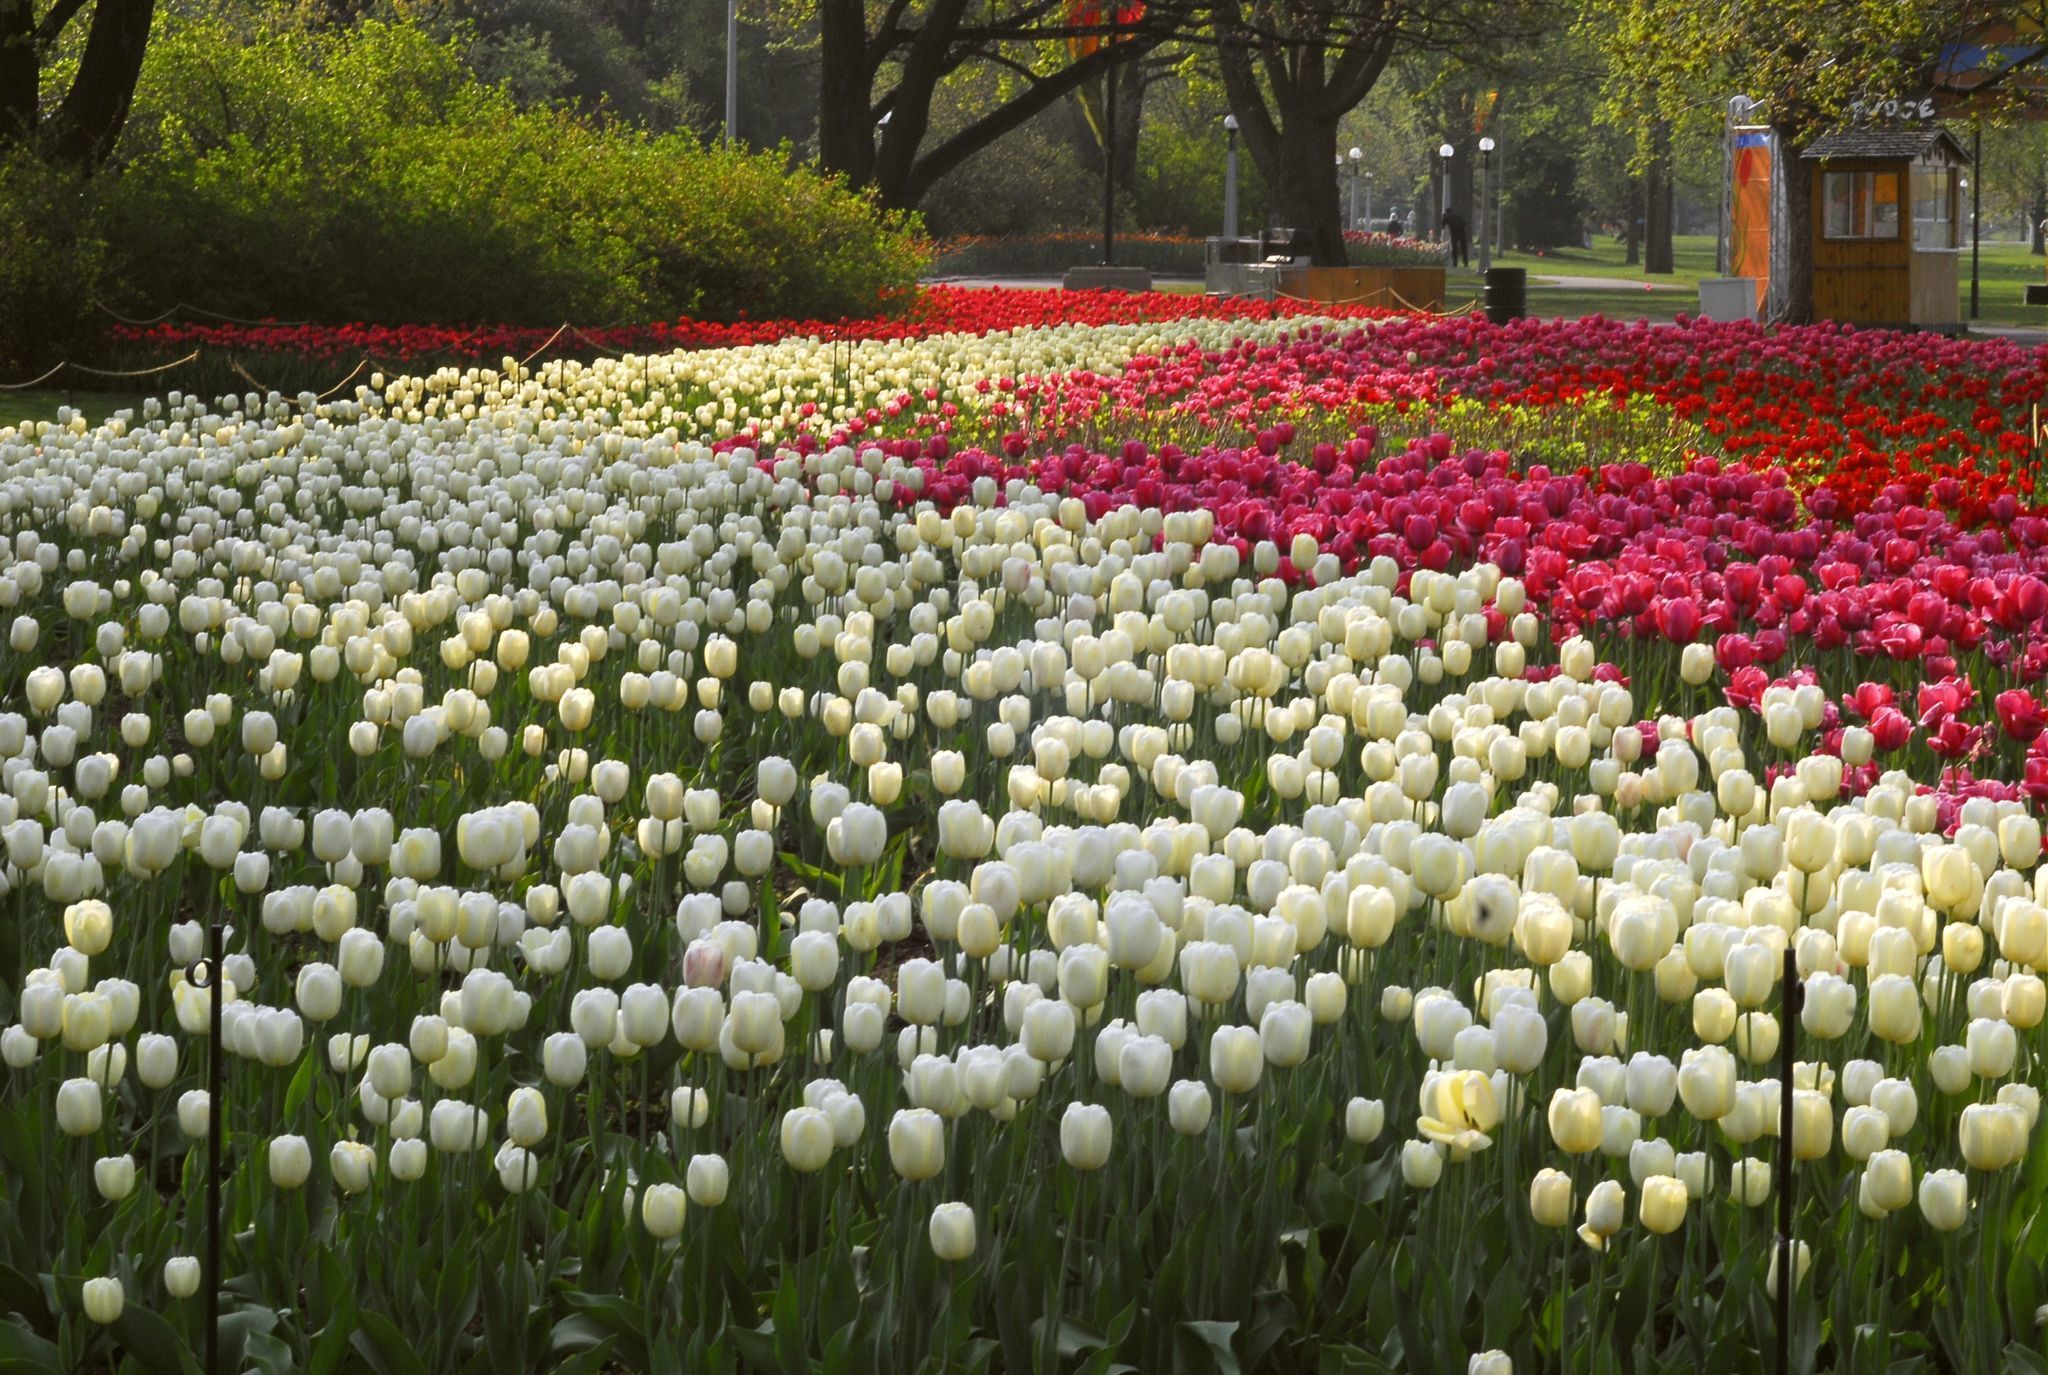 Large and very packed tulip beds